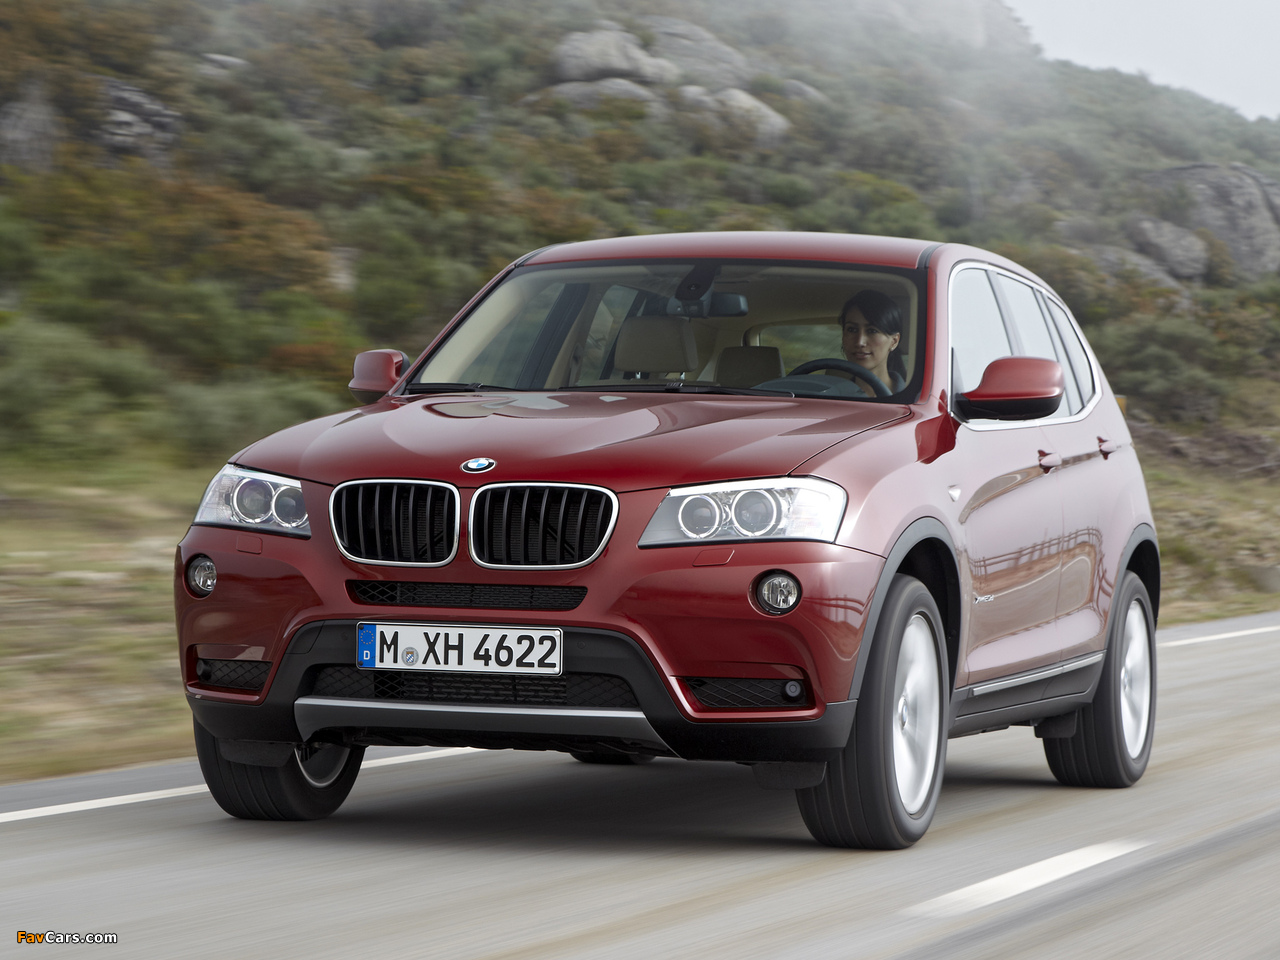 BMW X3 xDrive20d (F25) 2010 pictures (1280 x 960)